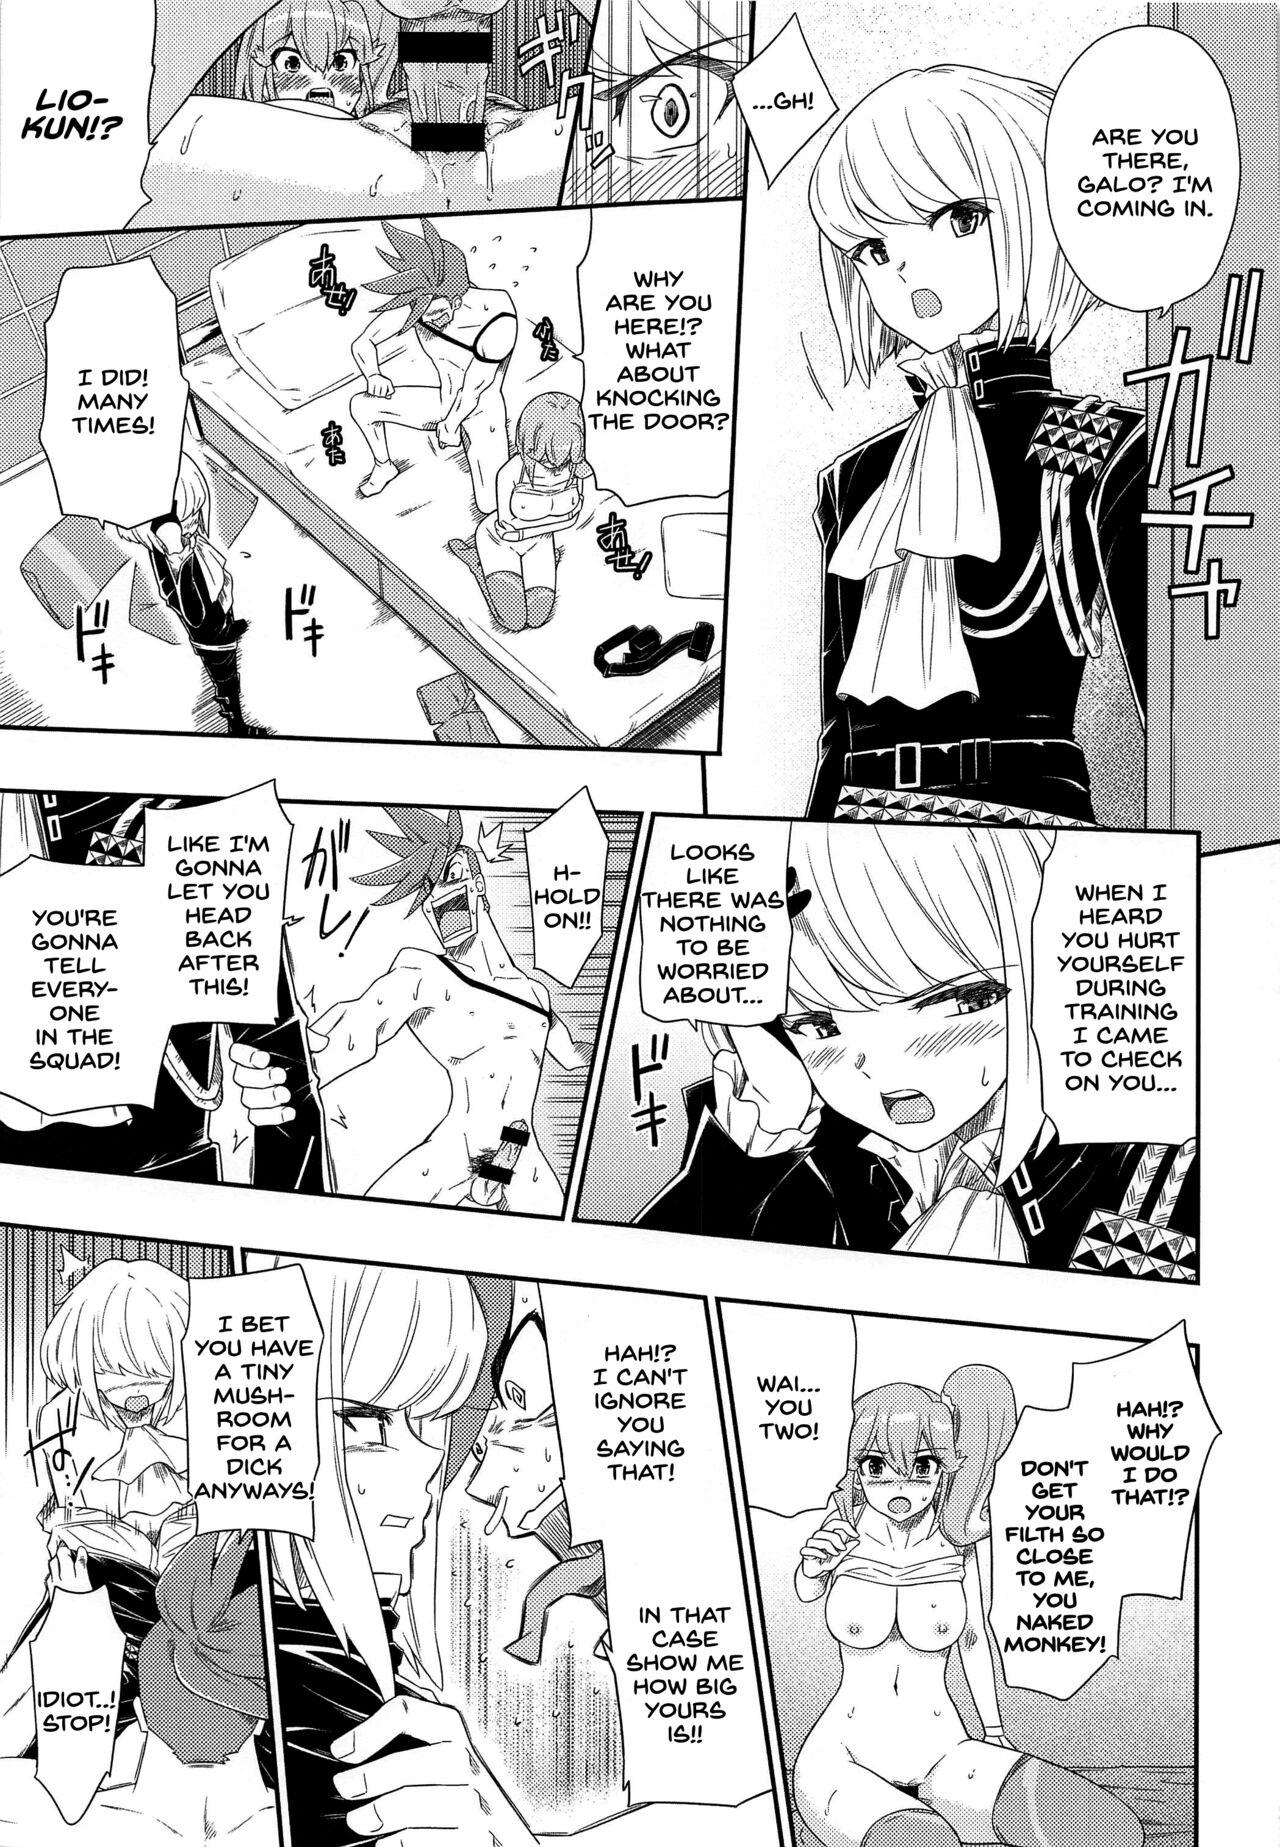 Curious EROMARE - Suddenly 3P sex is happening... Full - Page 6